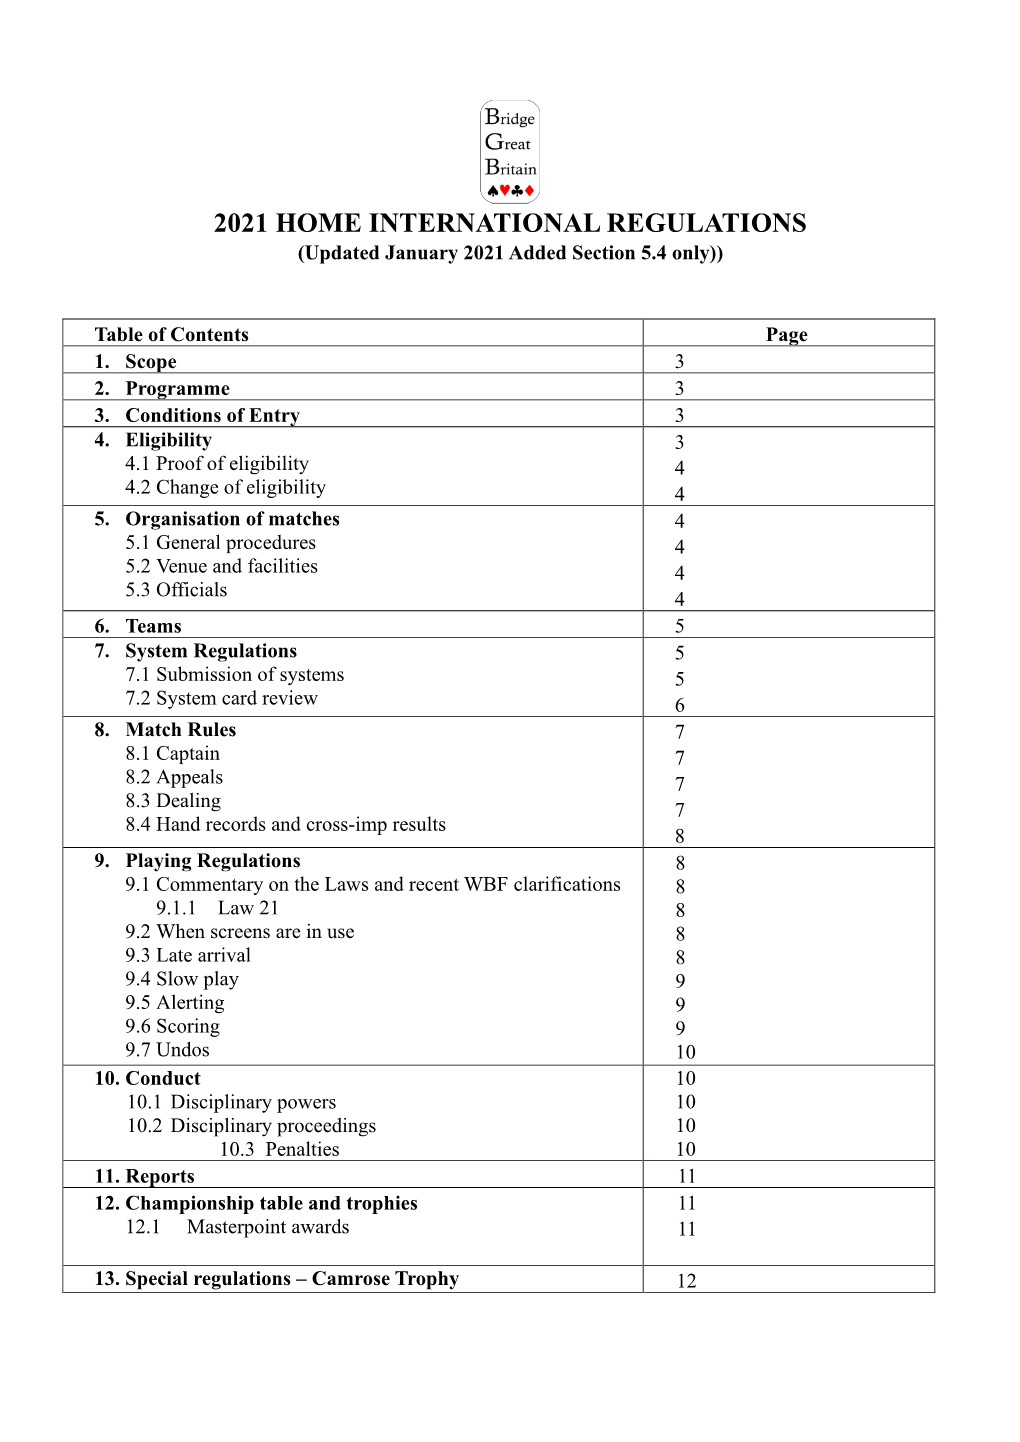 2021 HOME INTERNATIONAL REGULATIONS (Updated January 2021 Added Section 5.4 Only))